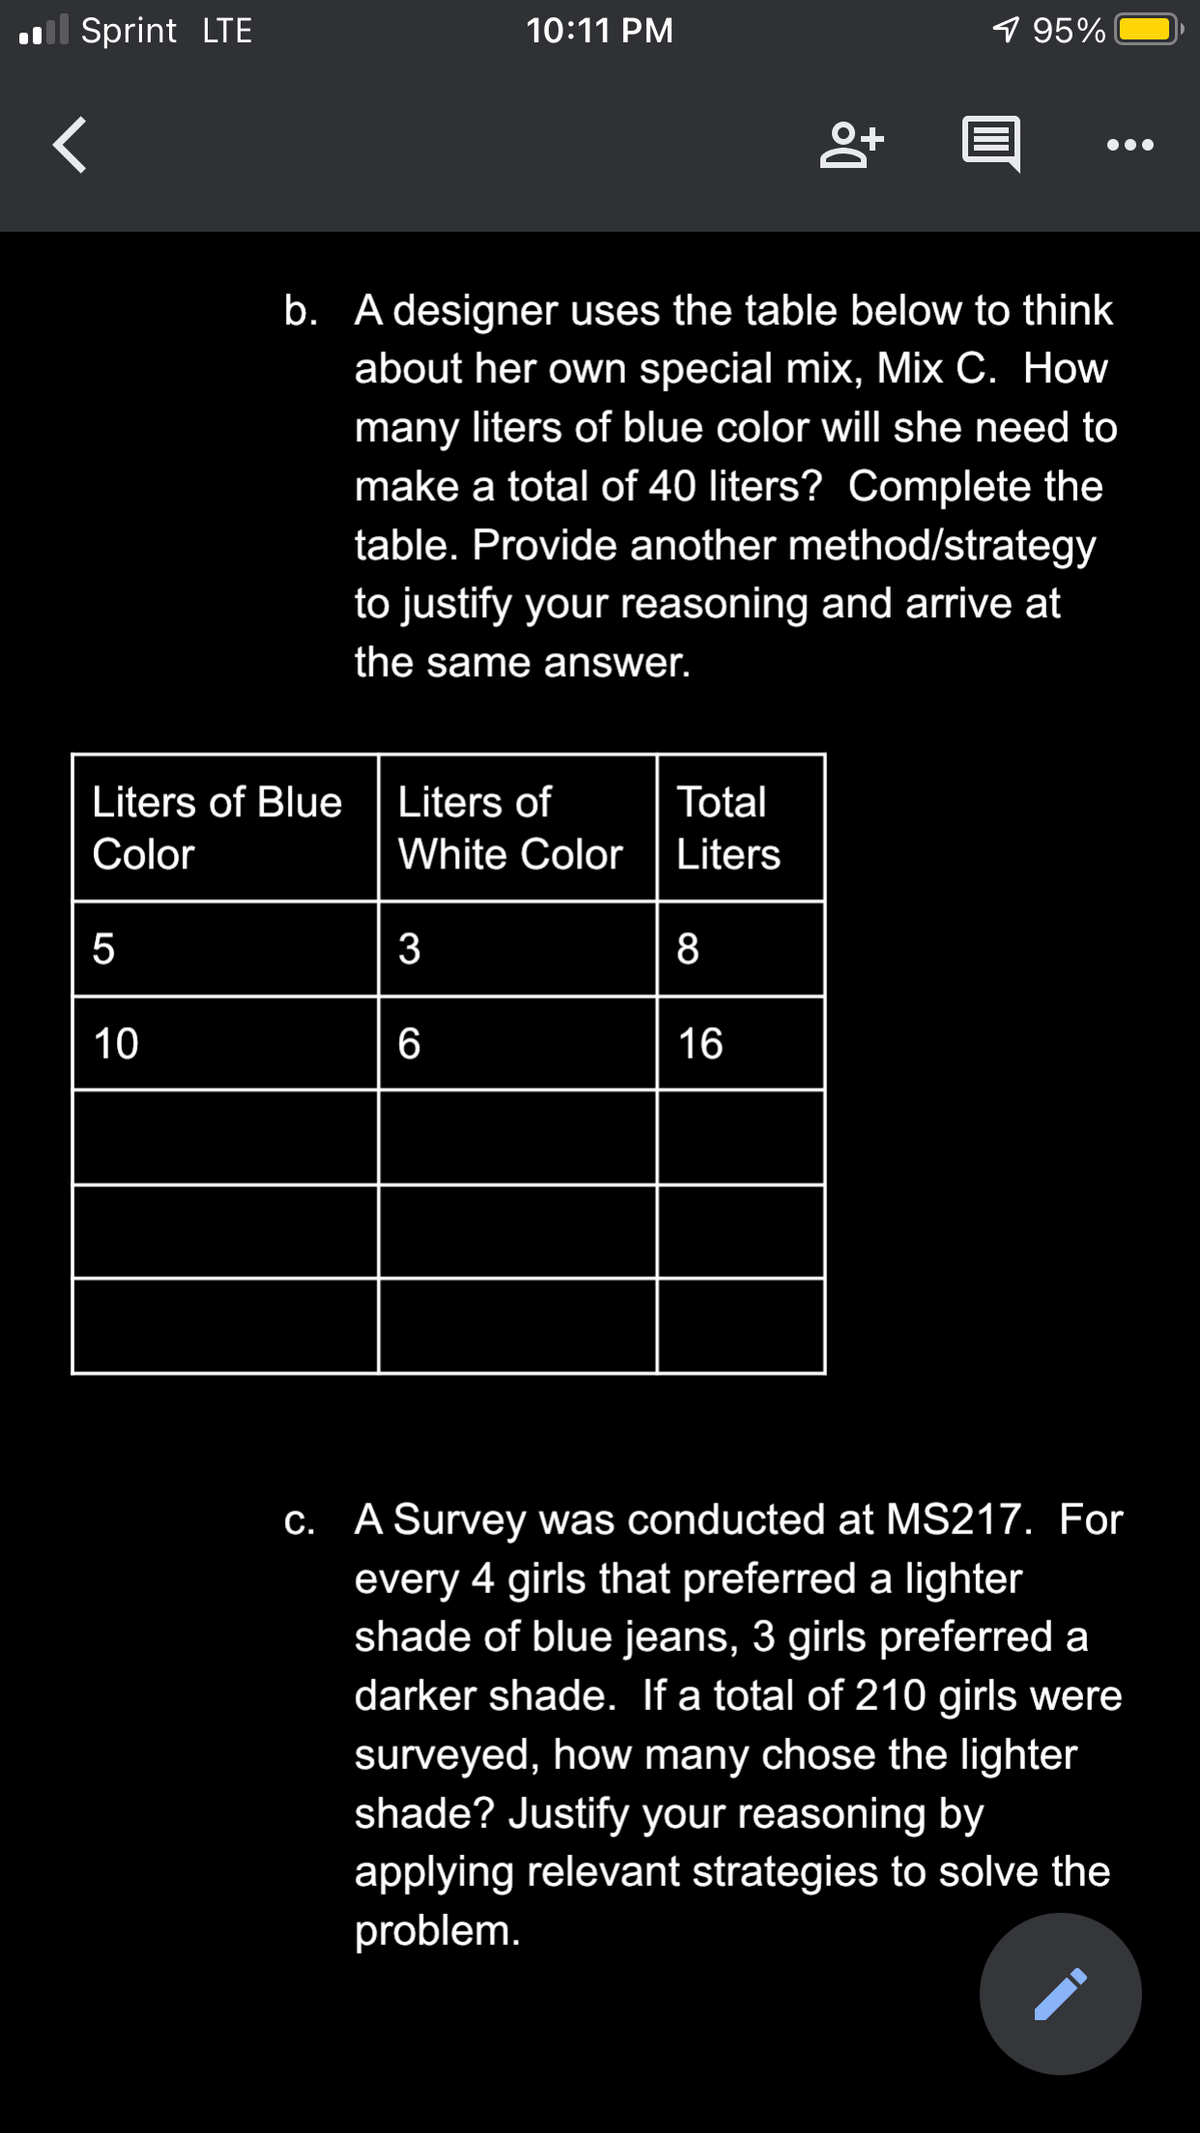 l Sprint LTE
10:11 PM
1 95%
b. A designer uses the table below to think
about her own special mix, Mix C. How
many liters of blue color will she need to
make a total of 40 liters? Complete the
table. Provide another method/strategy
to justify your reasoning and arrive at
the same answer.
Liters of Blue
Liters of
Total
Color
White Color
Liters
3
8
10
6
16
C. A Survey was conducted at MS217. For
every 4 girls that preferred a lighter
shade of blue jeans, 3 girls preferred a
darker shade. If a total of 210 girls were
surveyed, how many chose the lighter
shade? Justify your reasoning by
applying relevant strategies to solve the
problem.
